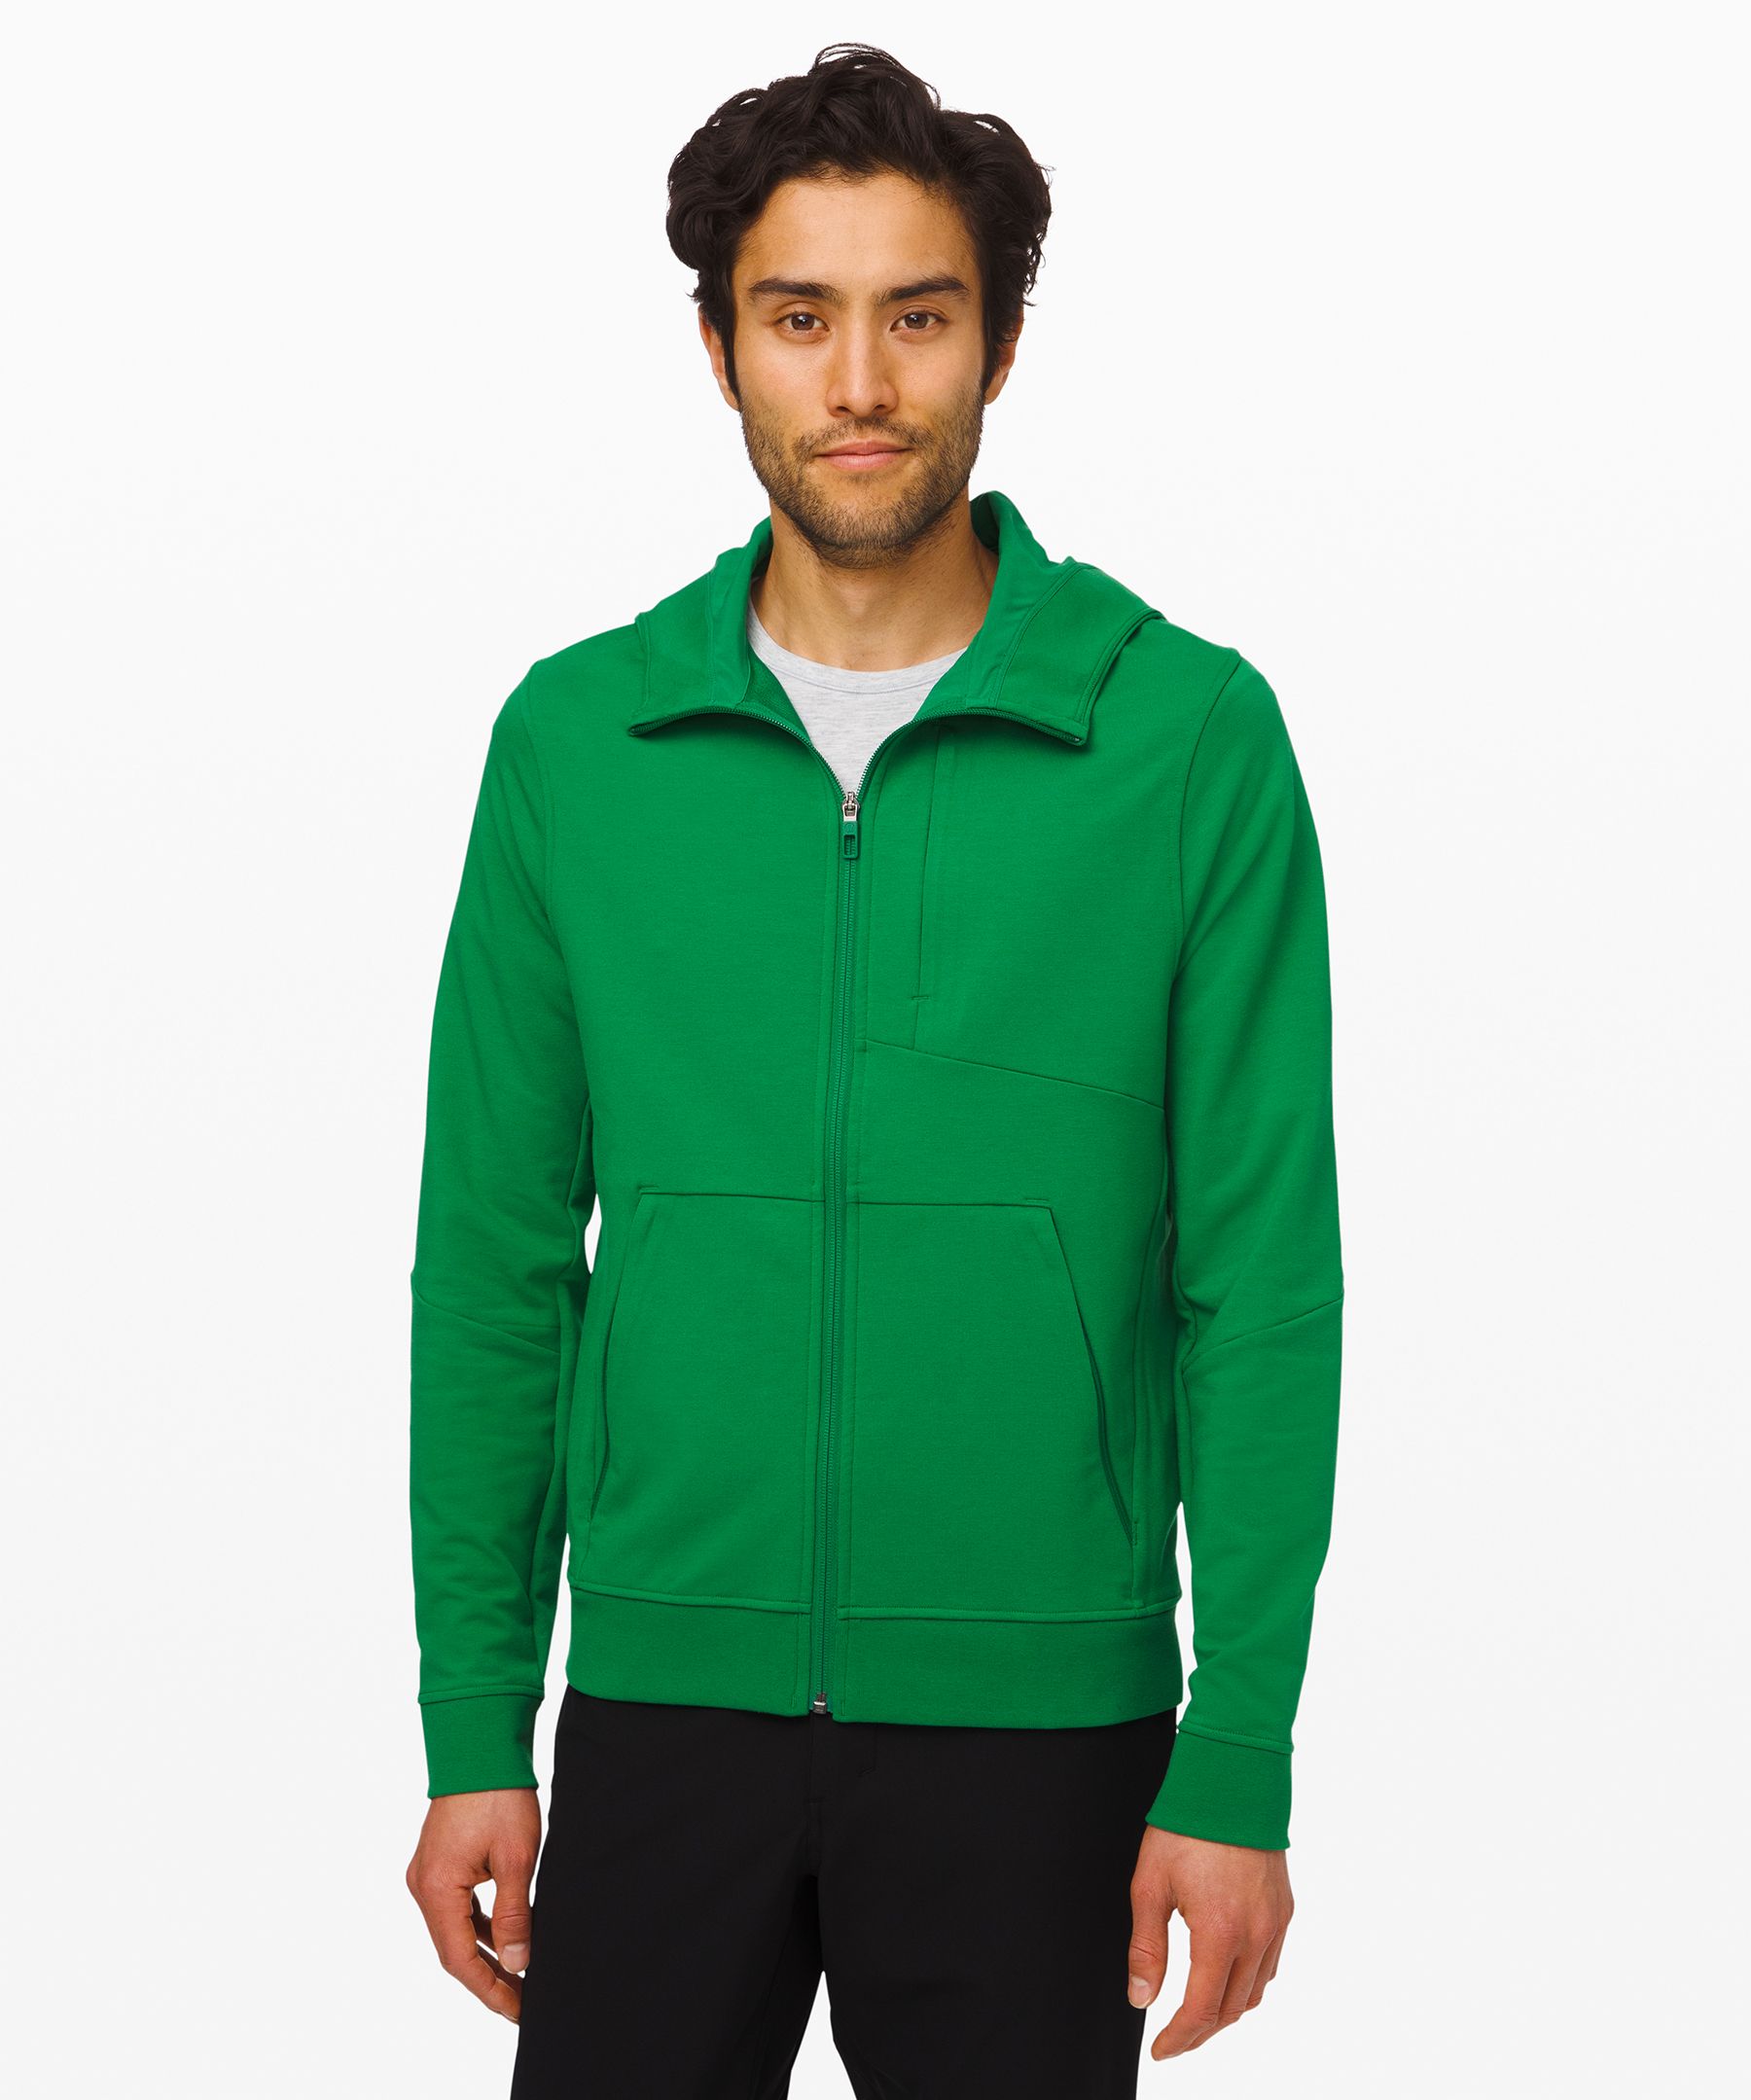 Lululemon City Sweat Zip Hoodie French Terry In Classic Green